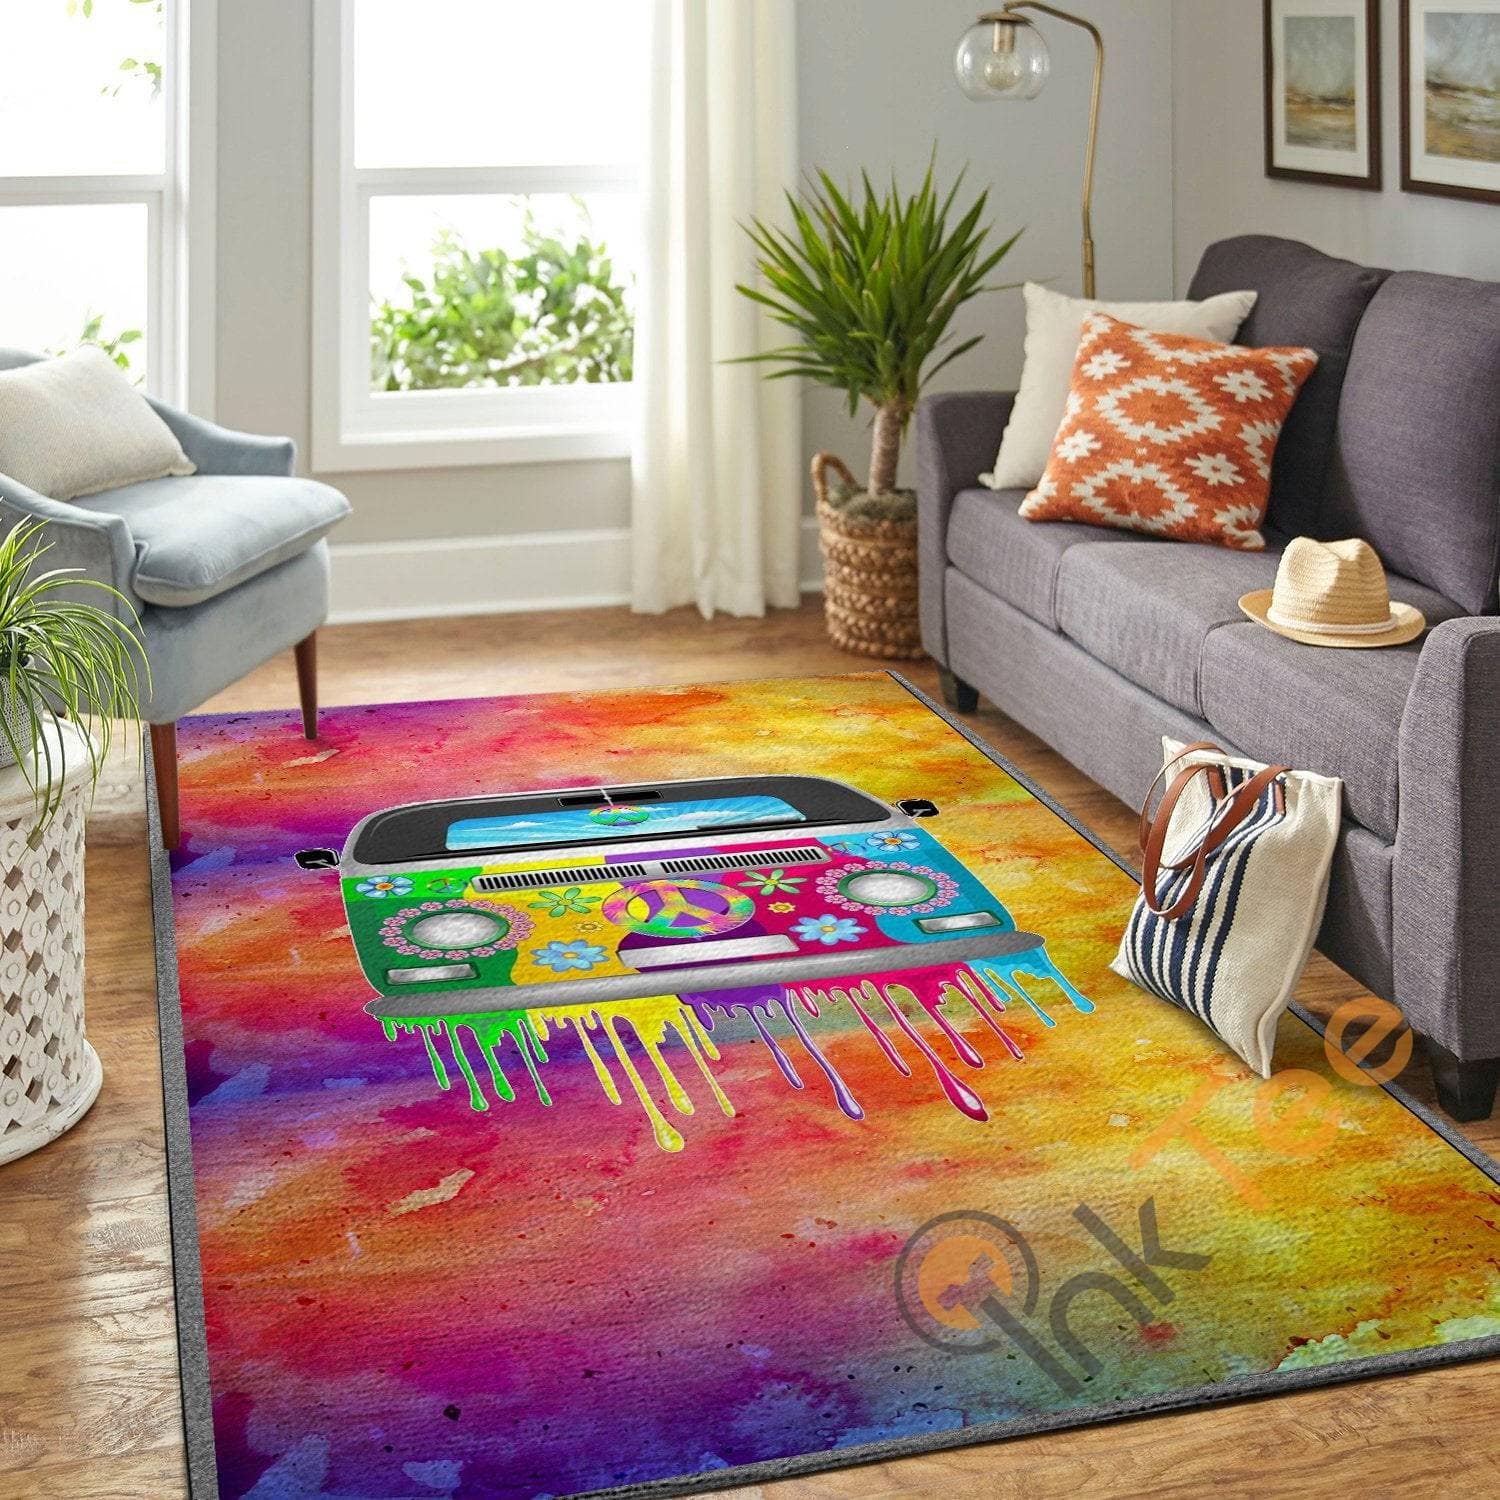 Peace Colourful Van Pattern In Hippie Soft Livingroom Carpet Highlight For Home Beautiful Rug